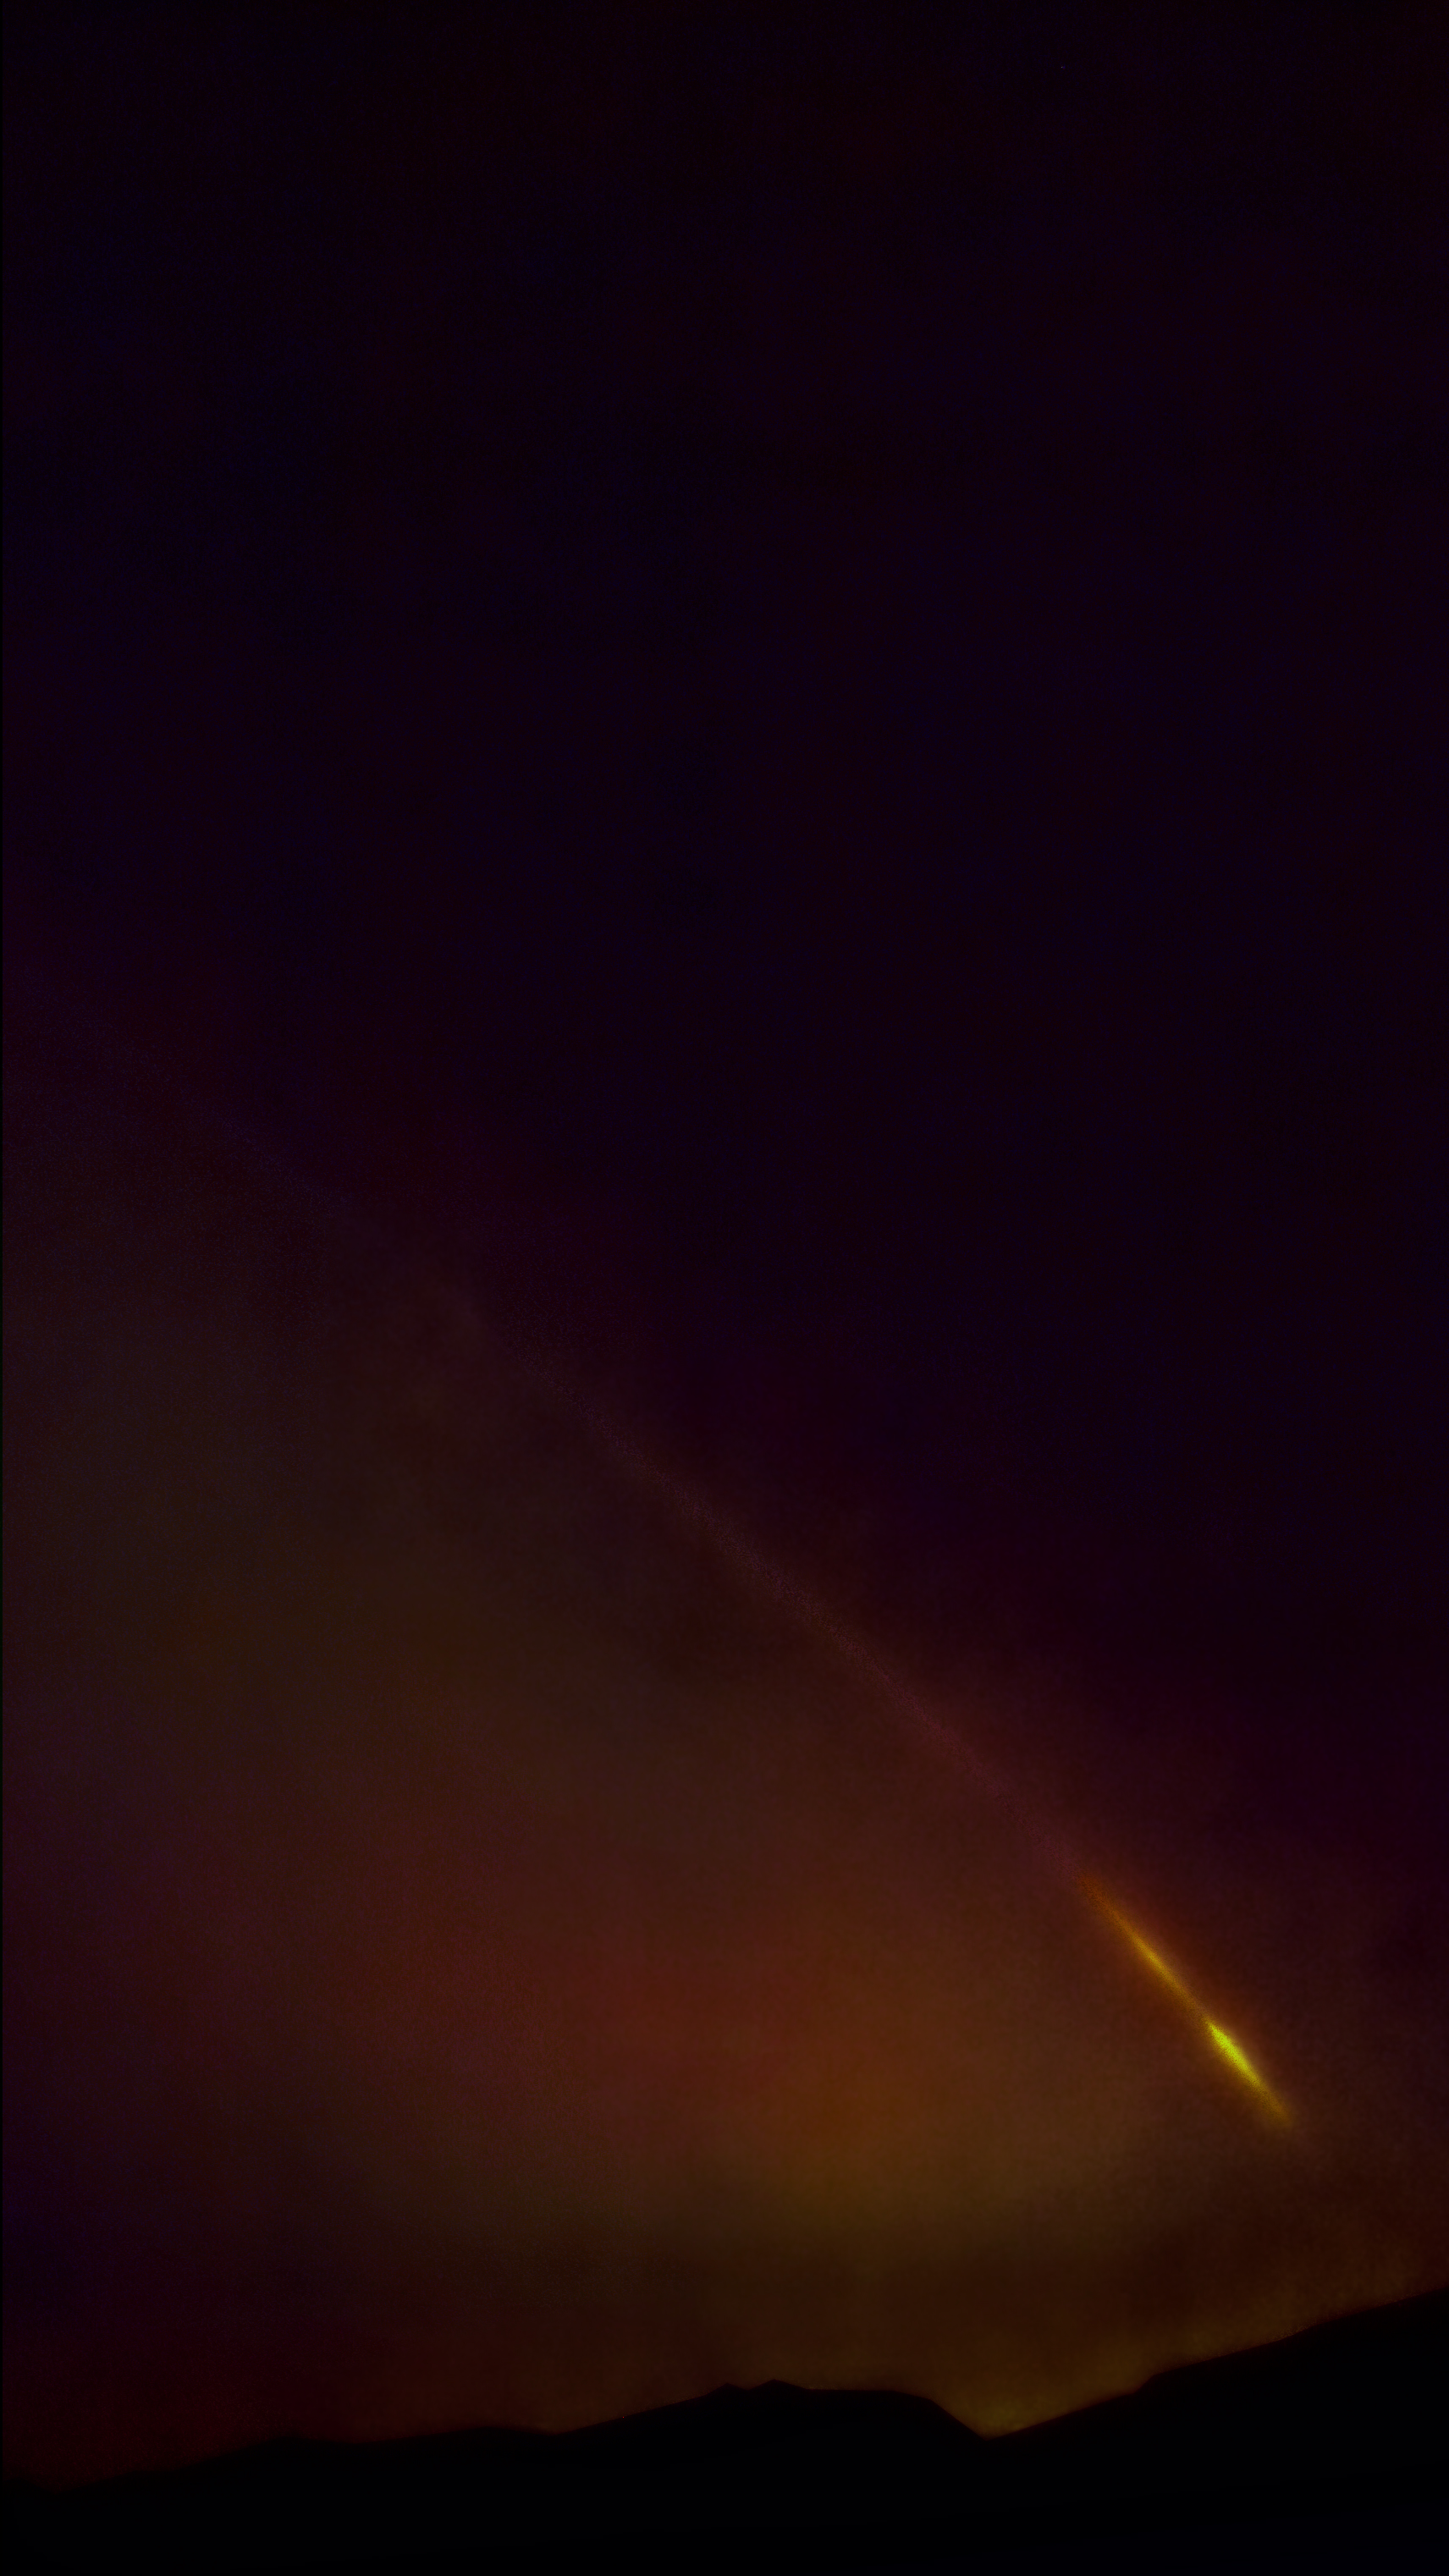 yellow tail of falcon 9 rocket streaks at about a 50 degree angle above Ojai hills, glowing red clouds below, black sky